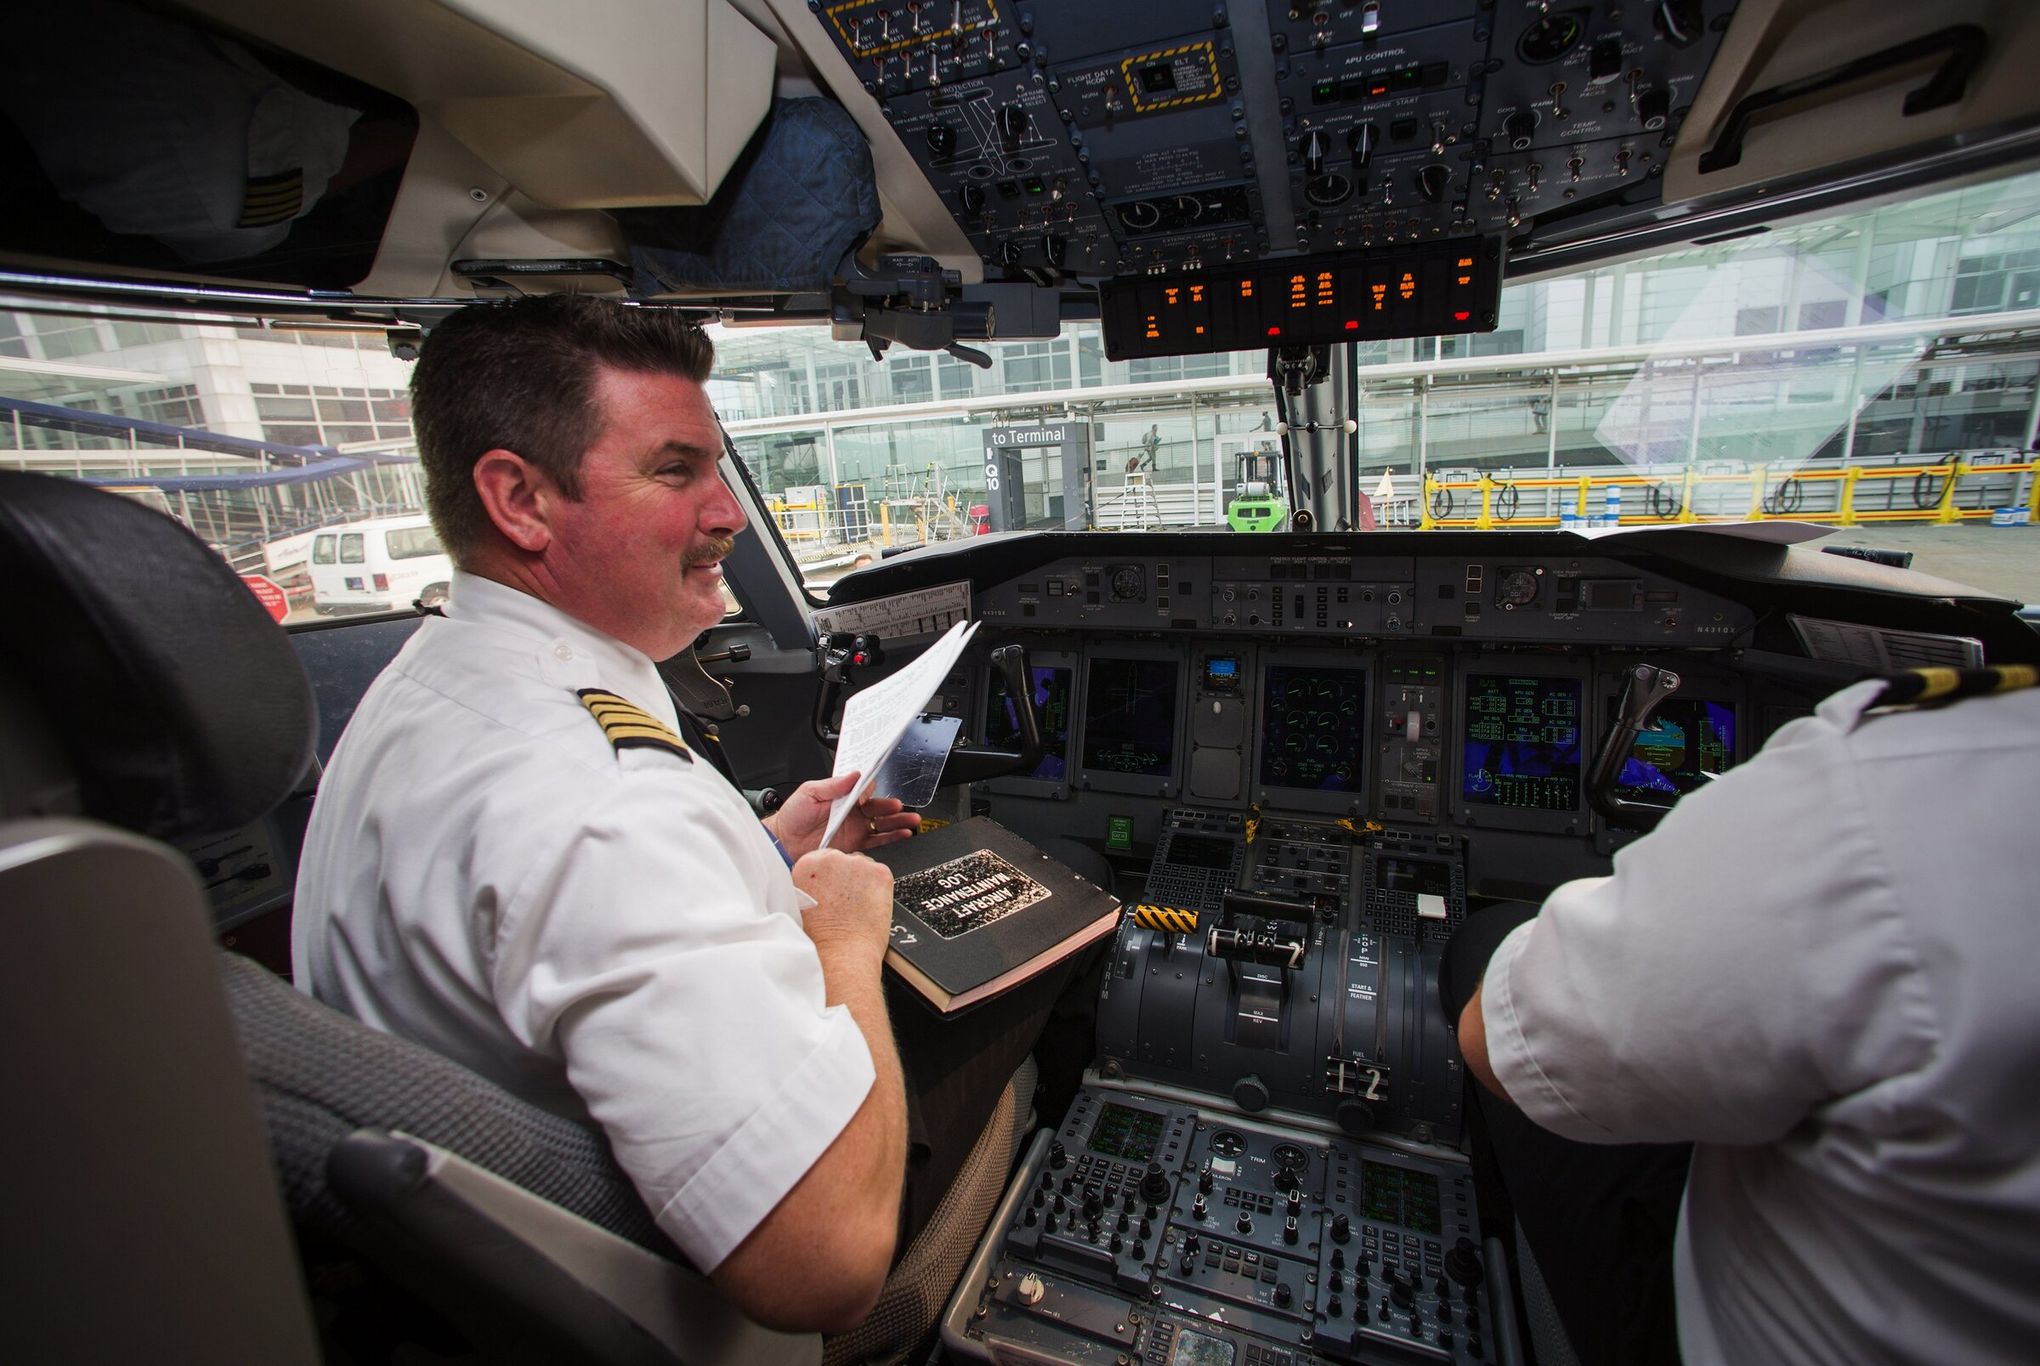 American Airlines pilots recommend you fly Delta or United